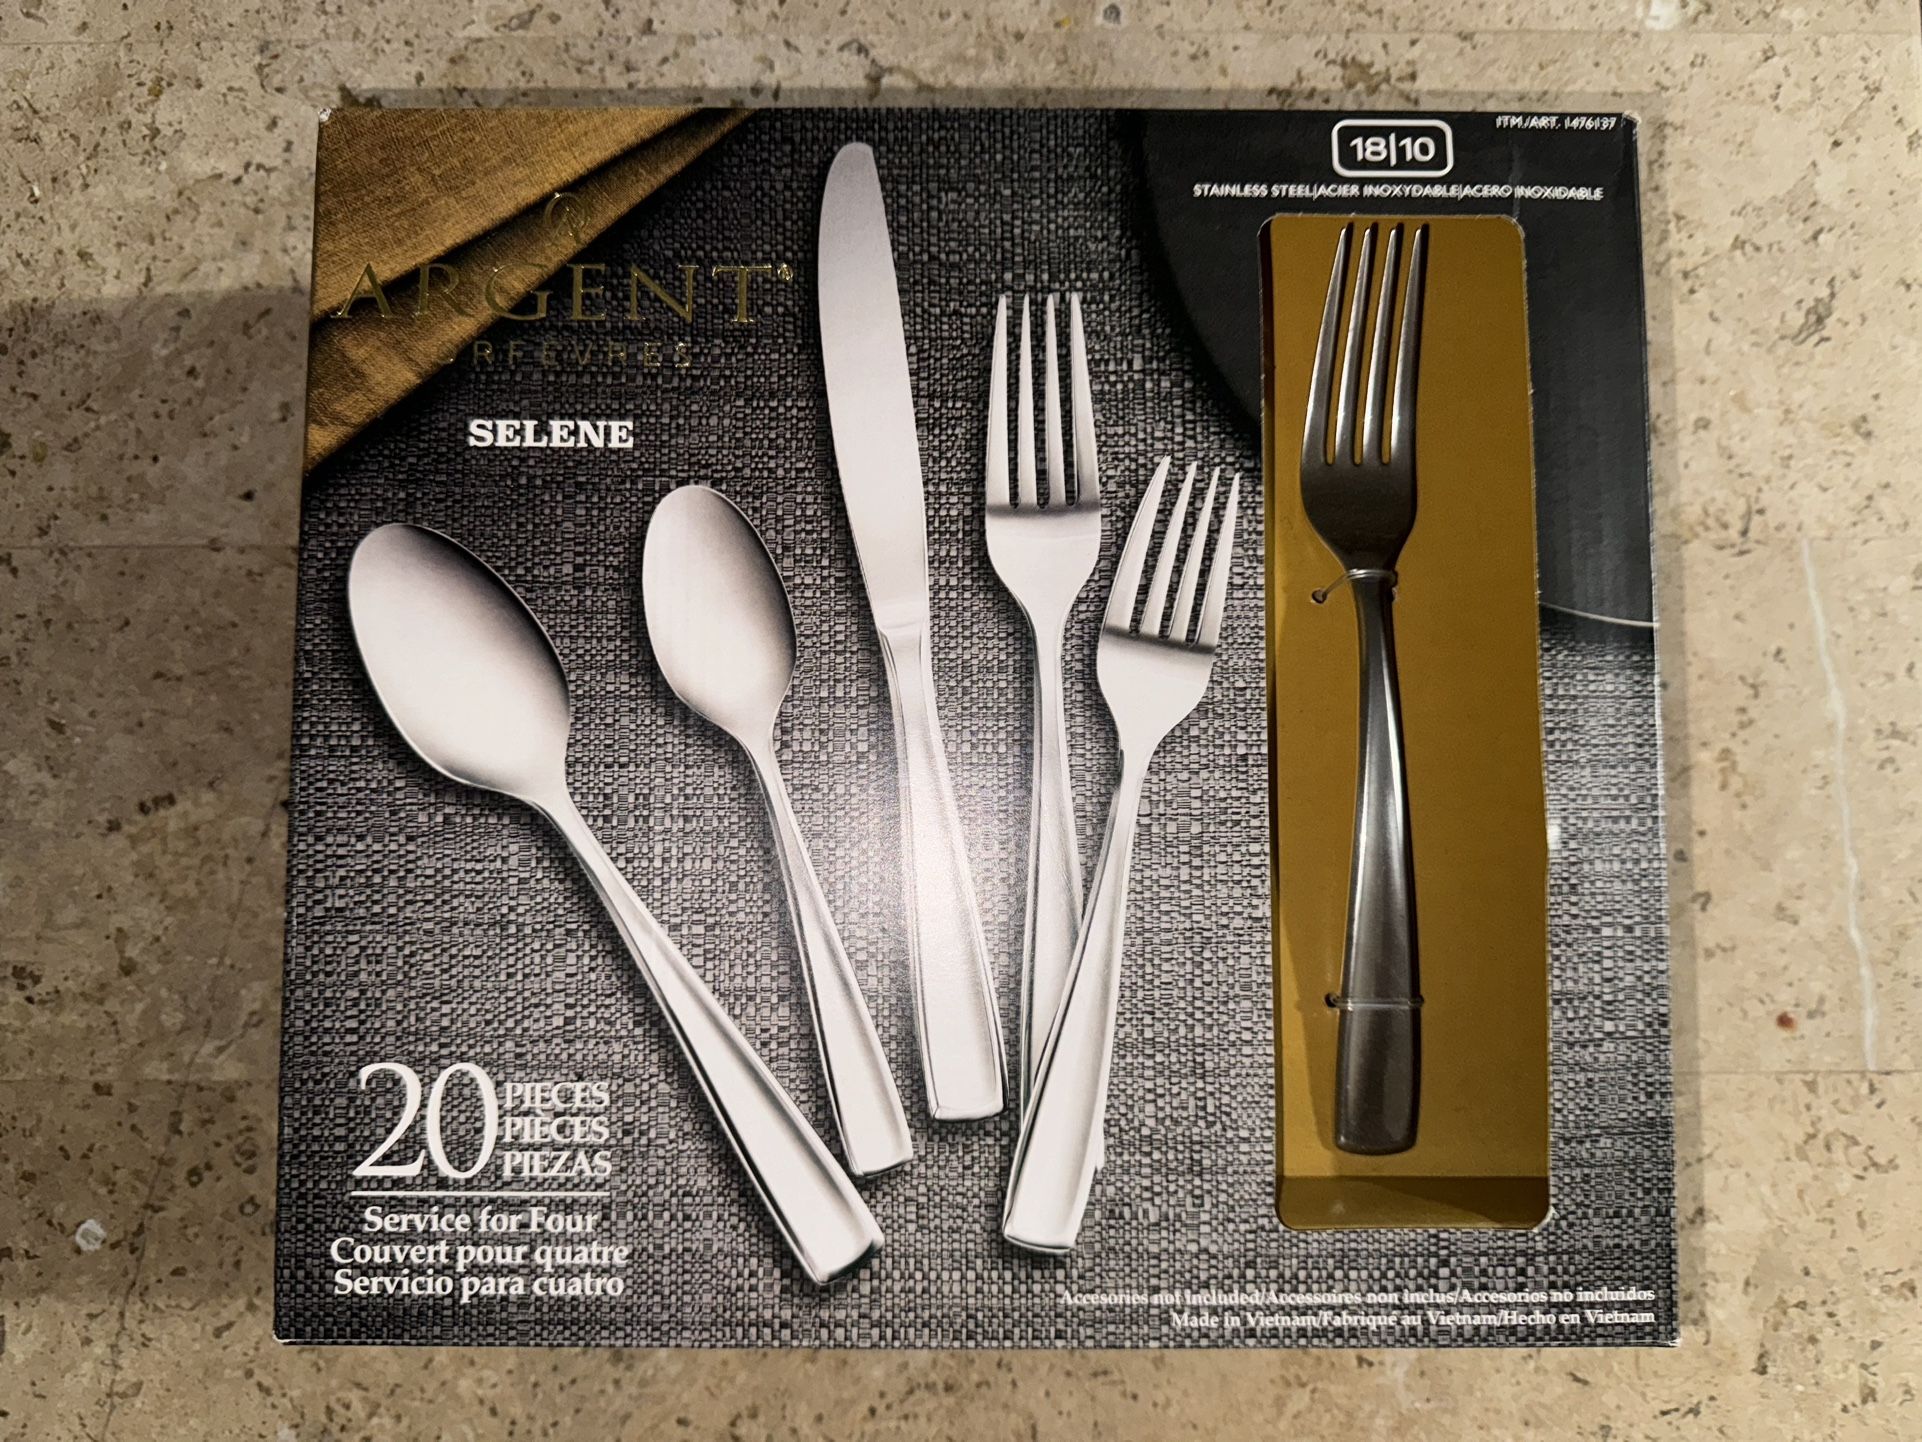 Argent Selene 20 Pieces Stainless Steel (Orfevres)